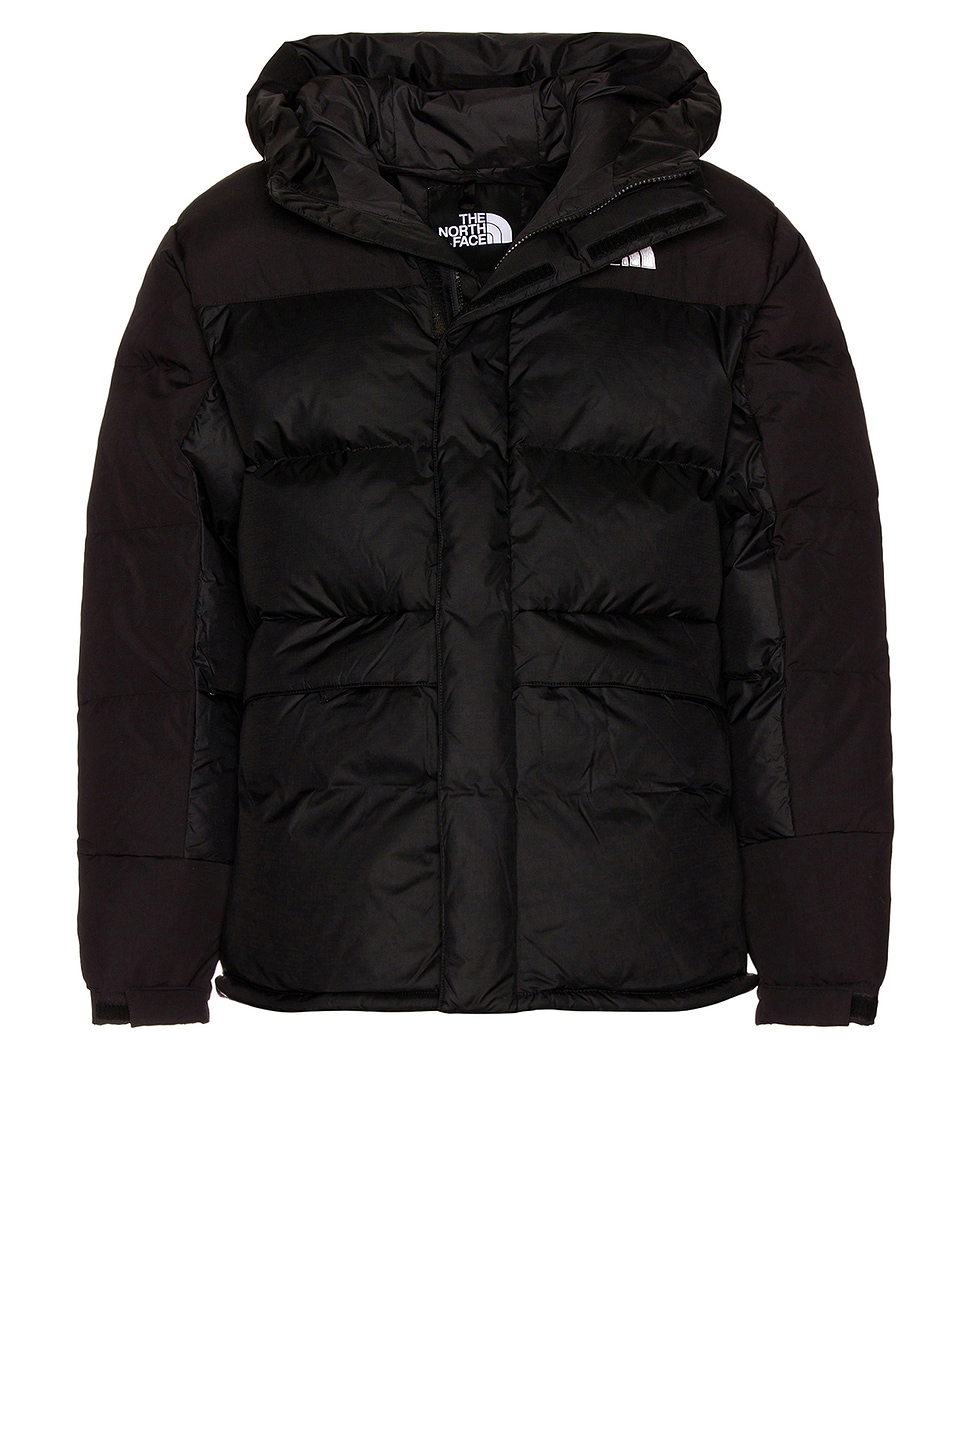 Image 1 of The North Face HMLYN Down Parka in TNF Black